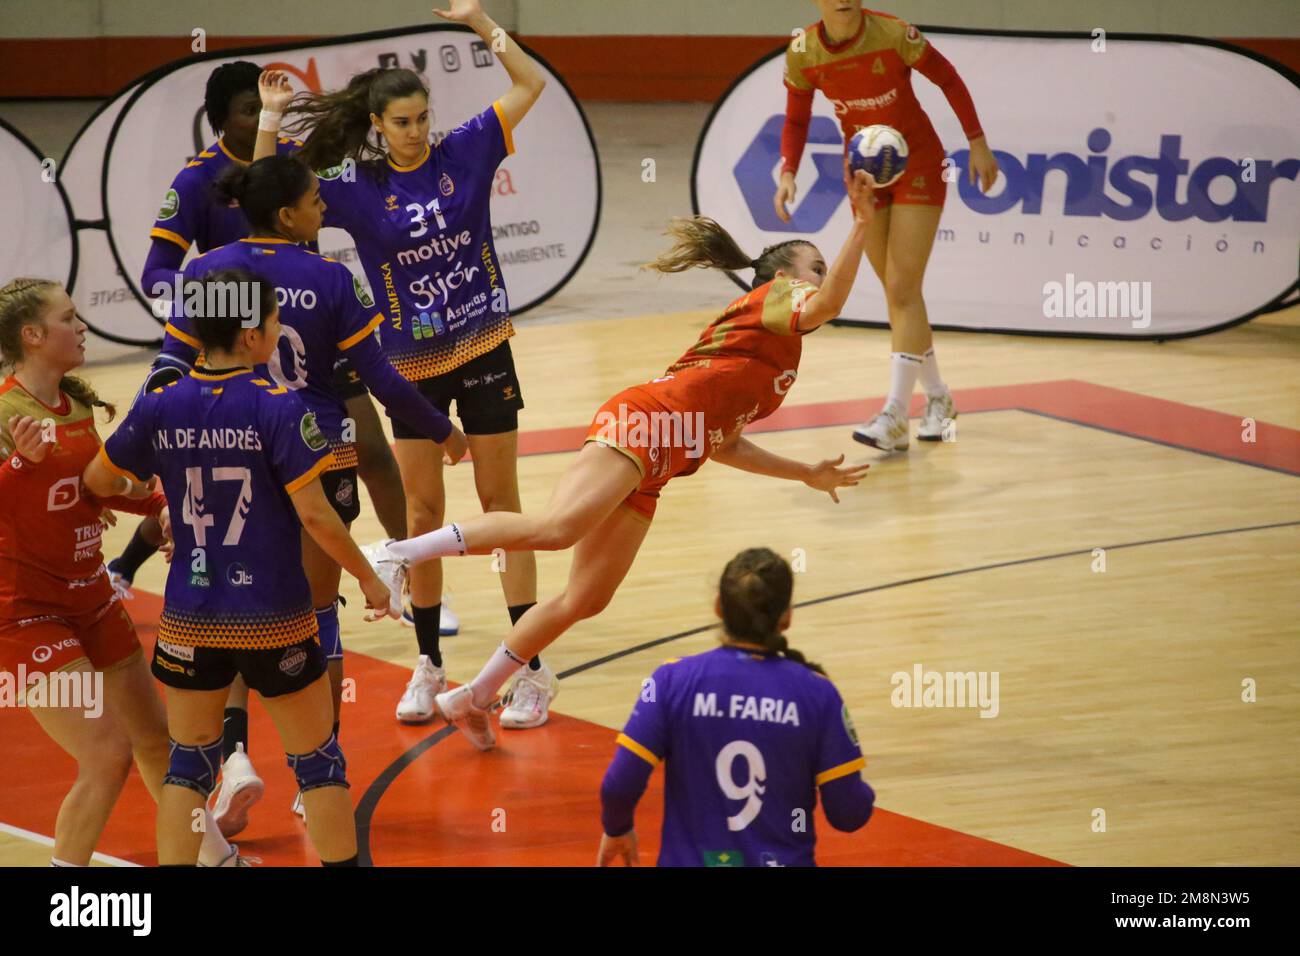 Gijon, Spain. 14th Jan, 2023. Gijon, SPAIN: Hazena Kynzvart's player Veronika Dvorakova (14) shoots on goal during the second leg match of the round of 16 of the EHF European Cup Women 2022/23 between Motive.co Gijon and Hazena Kynzvart with result of 35-23 for the locals played at the Pabellón de Deportes de La Guía - Presidente Adolfo Suarez in Gijon, Spain on January 14, 2023. (Photo by Alberto Brevers/Pacific Press) Credit: Pacific Press Media Production Corp./Alamy Live News Stock Photo